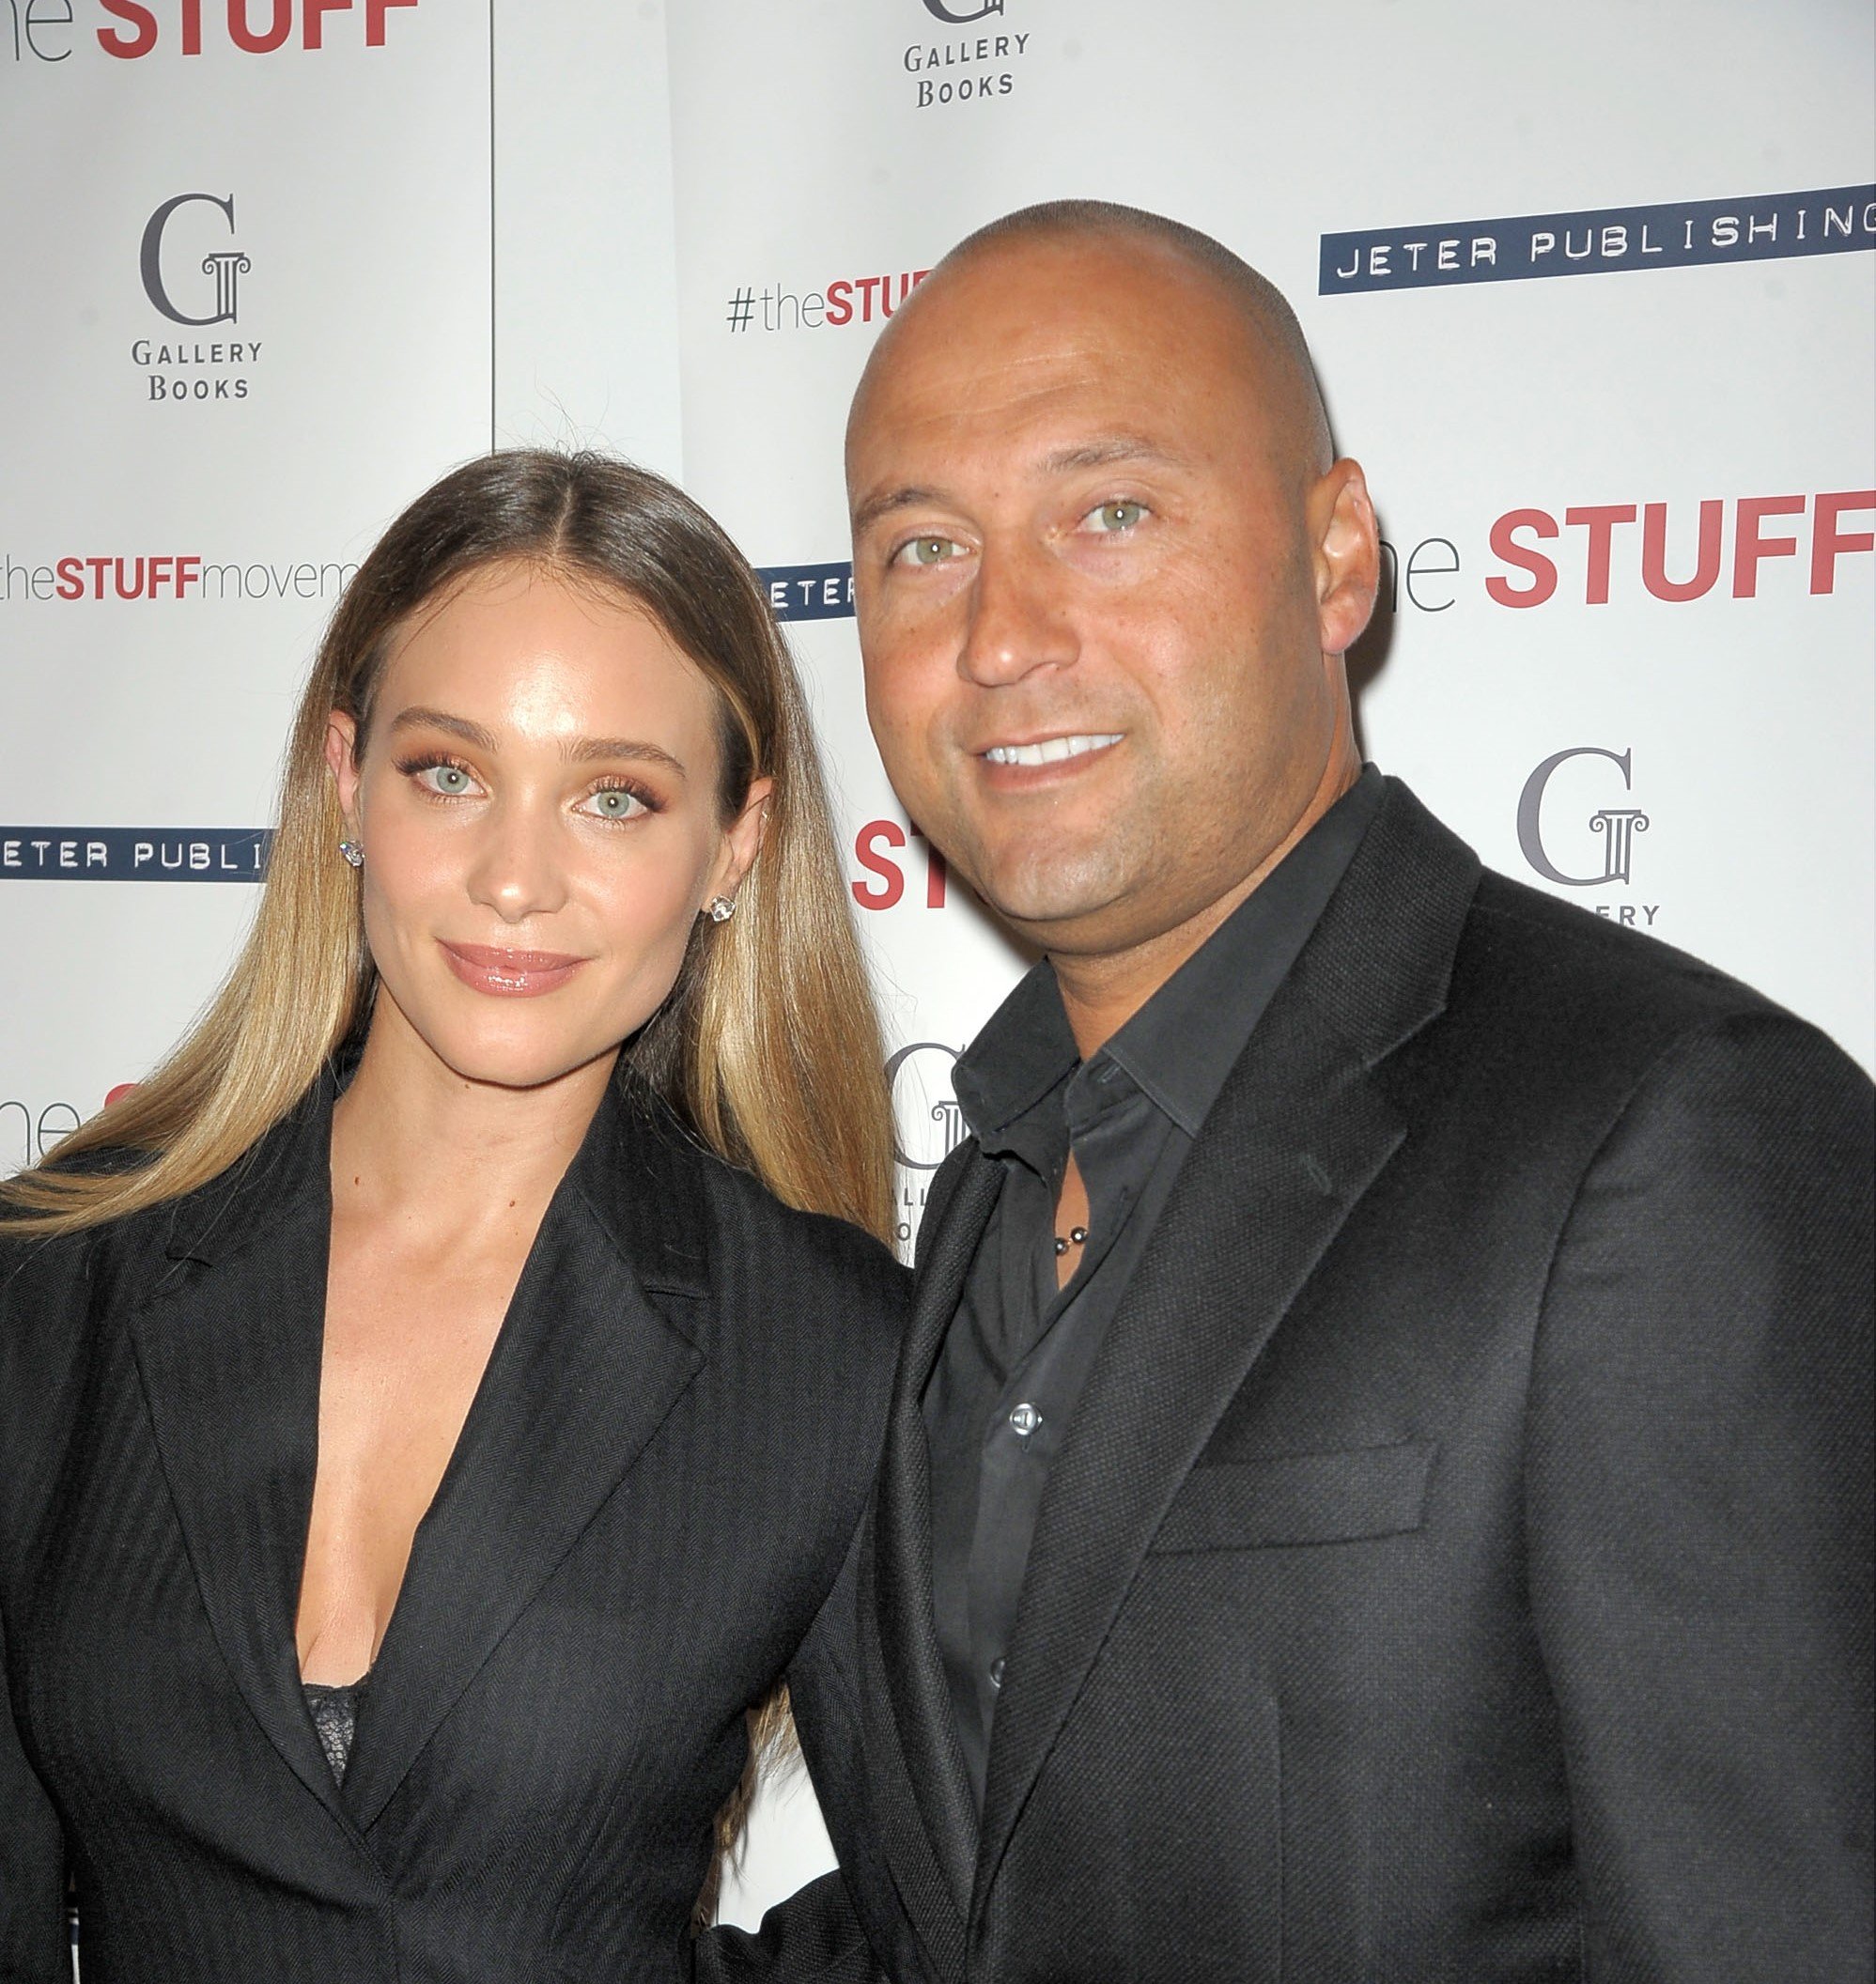 Hannah Davis Jeter and Derek Jeter, who is older than his wife, smile at event in NYC